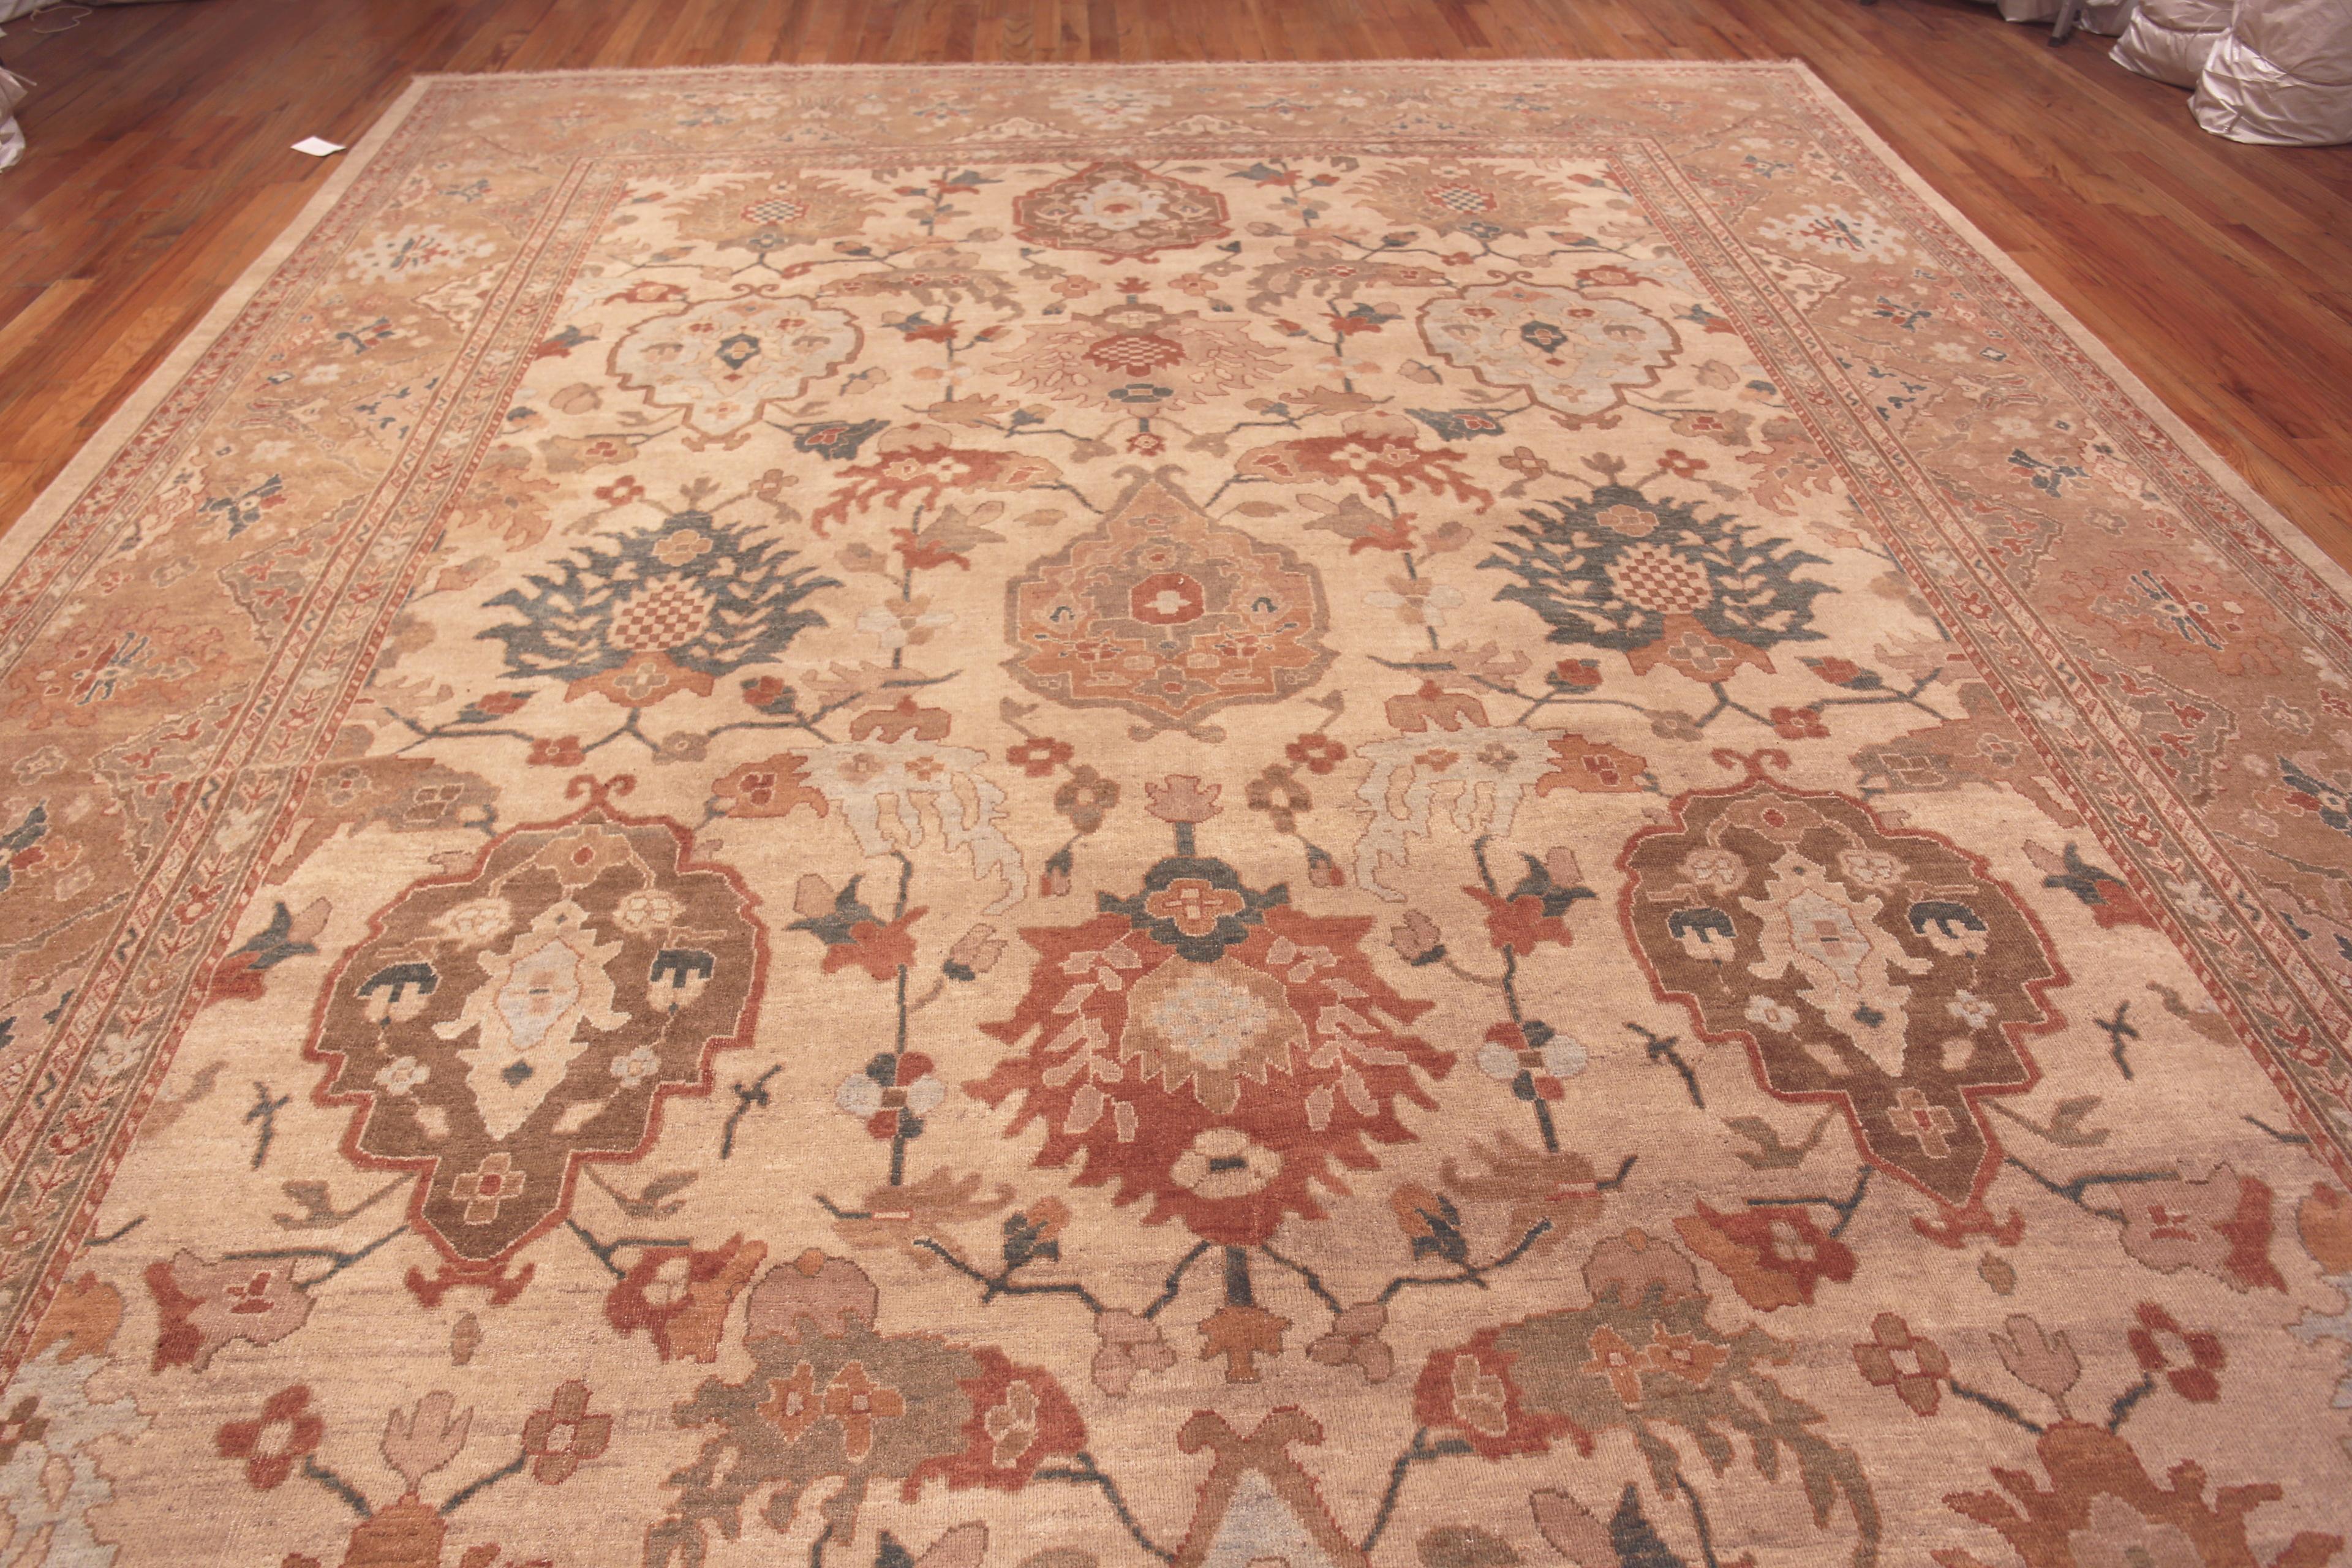 Grand tapis persan moderne Sultanabad, Pays d'origine : Tapis Persans Modernes Vintage. Circa date : Moderne. Taille : 12 ft 6 in x 17 ft 6 in (3,81 m x 5,33 m)